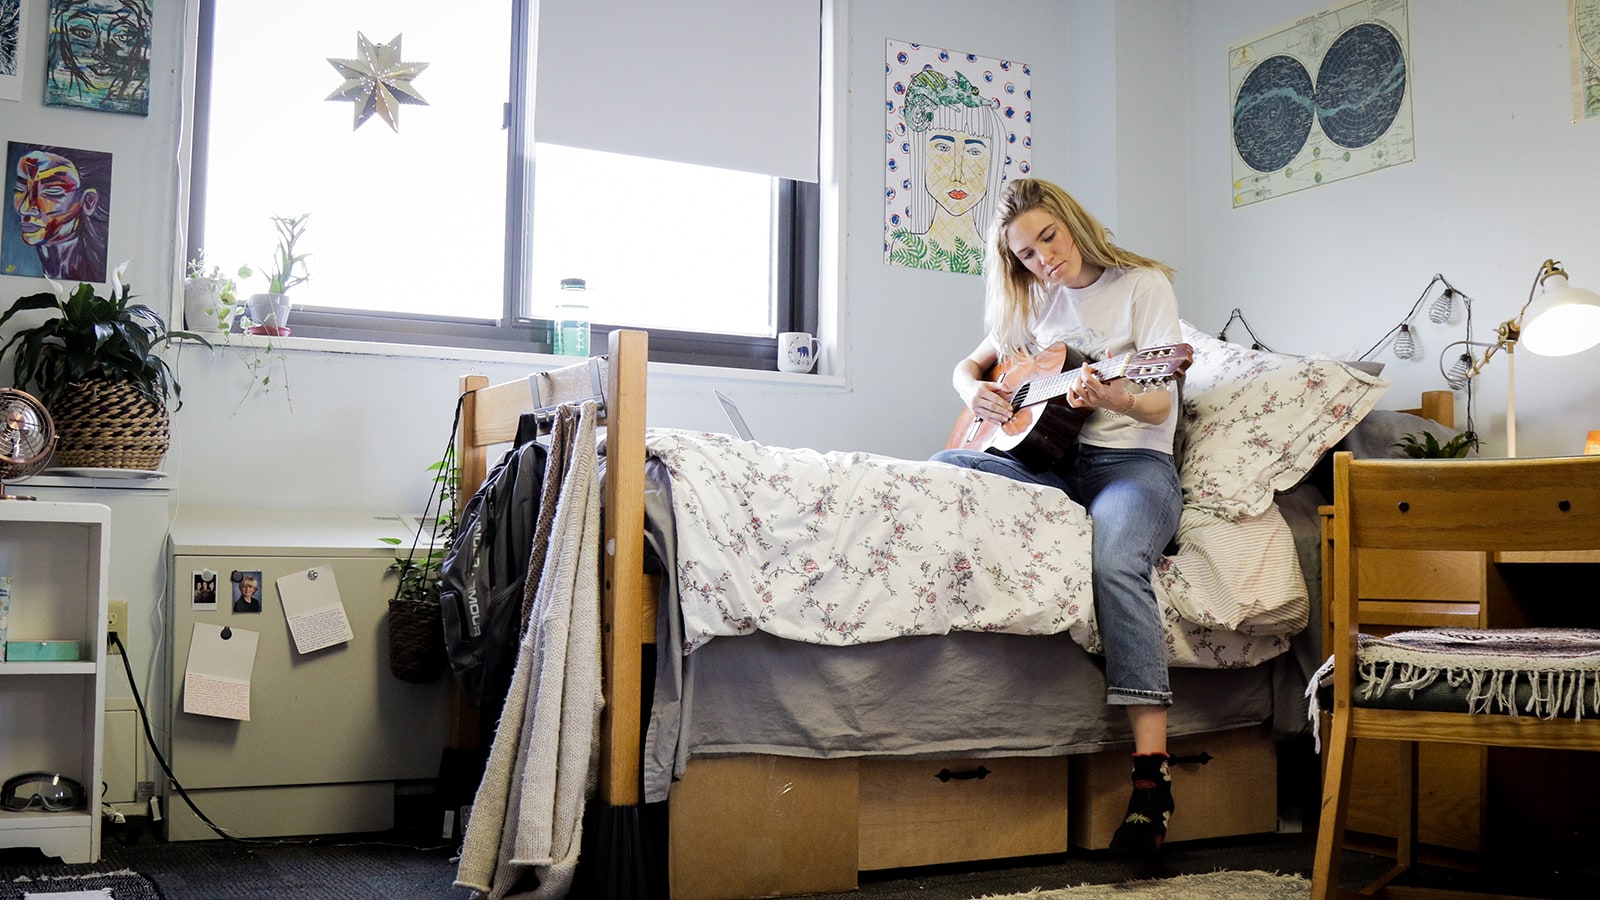 Student sitting on dorm bed playing guitar